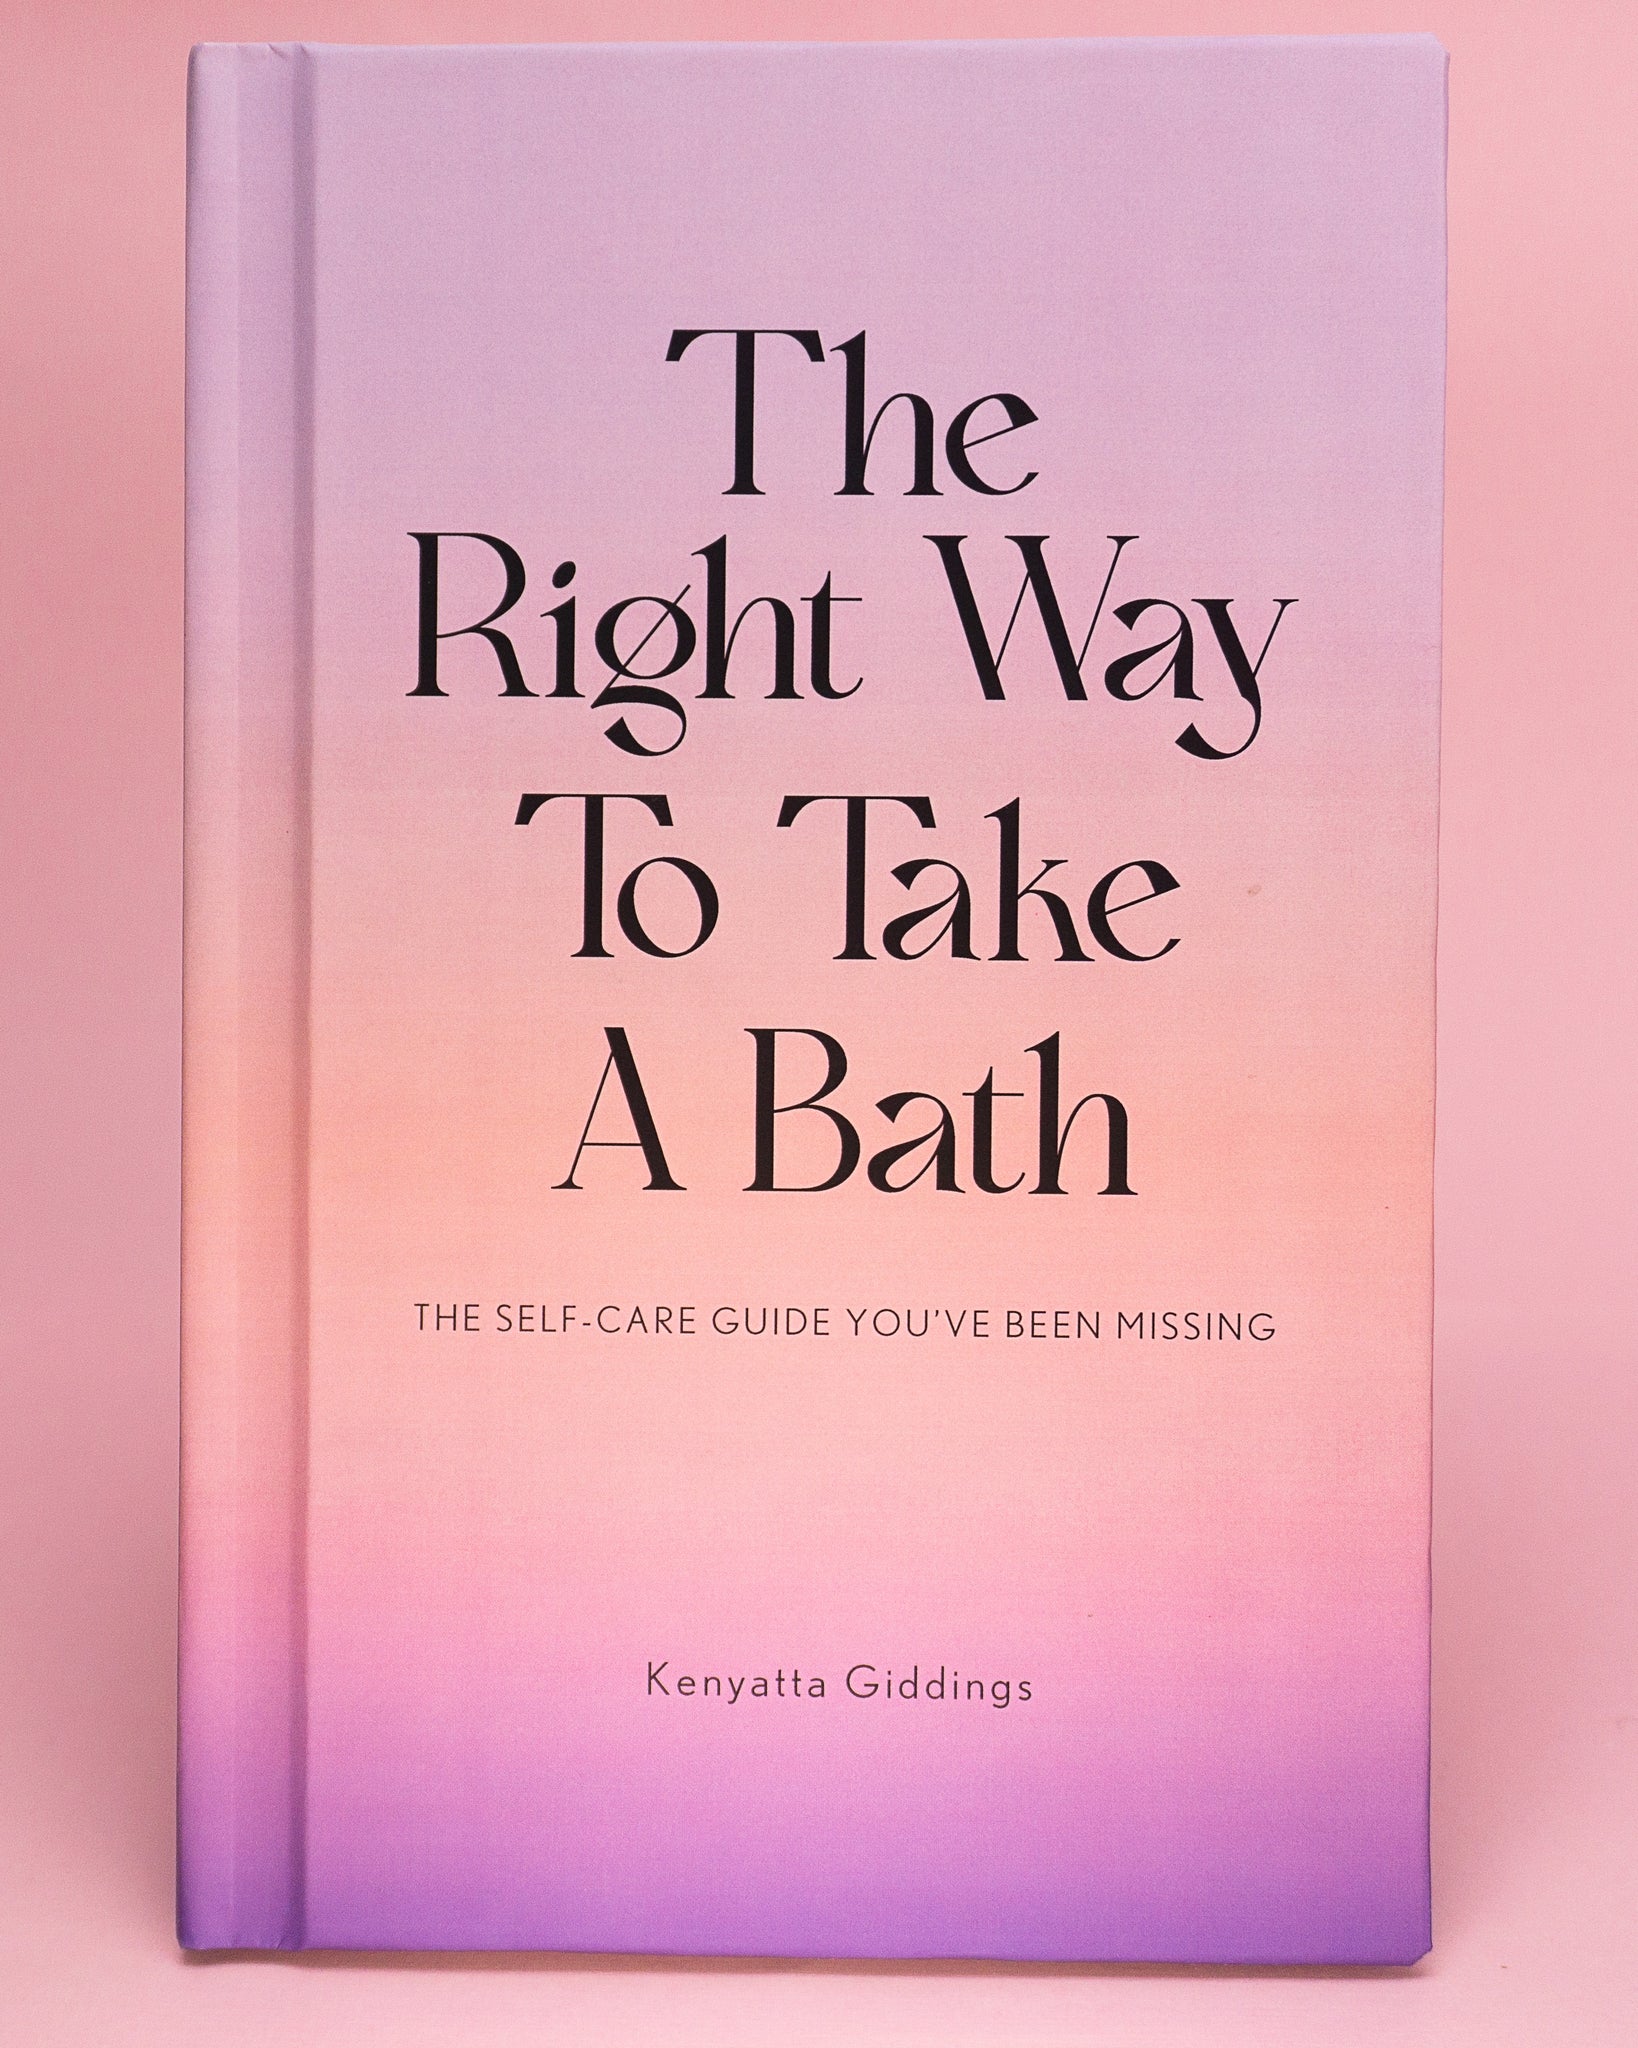 The Right Way To Take A Bath hardcover book with a soft touch matte pastel cover against a pink background. The Right Way To Take A Bath is a self-care guide that captures bubble bath tips in a decor-friendly book that makes the perfect spa gift.